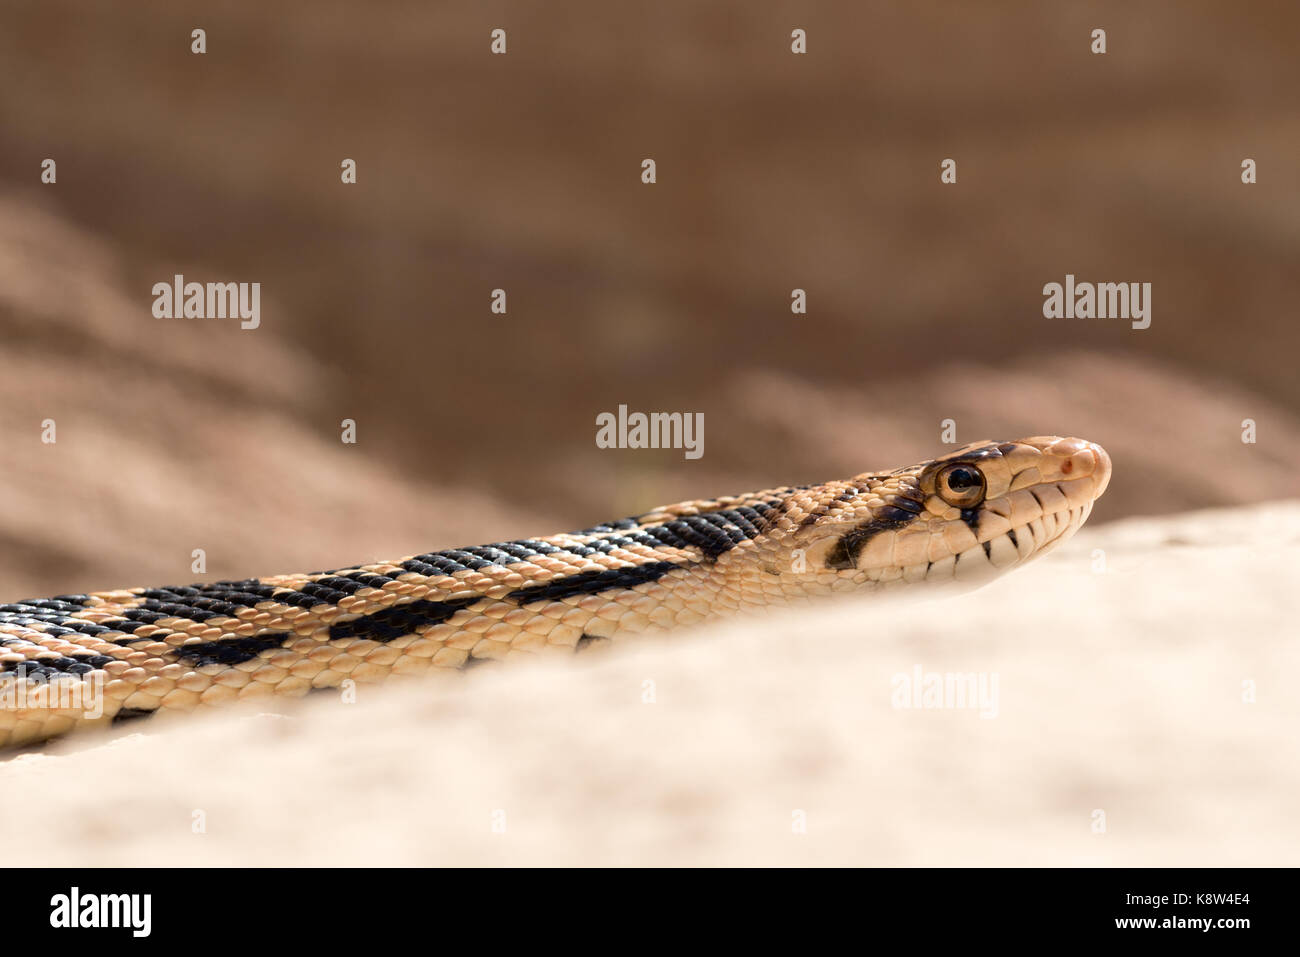 Great Basin gopher snake (Pituophis catenifer deserticola), Grand Staircase - Escalante National Monument, Utah. Stock Photo